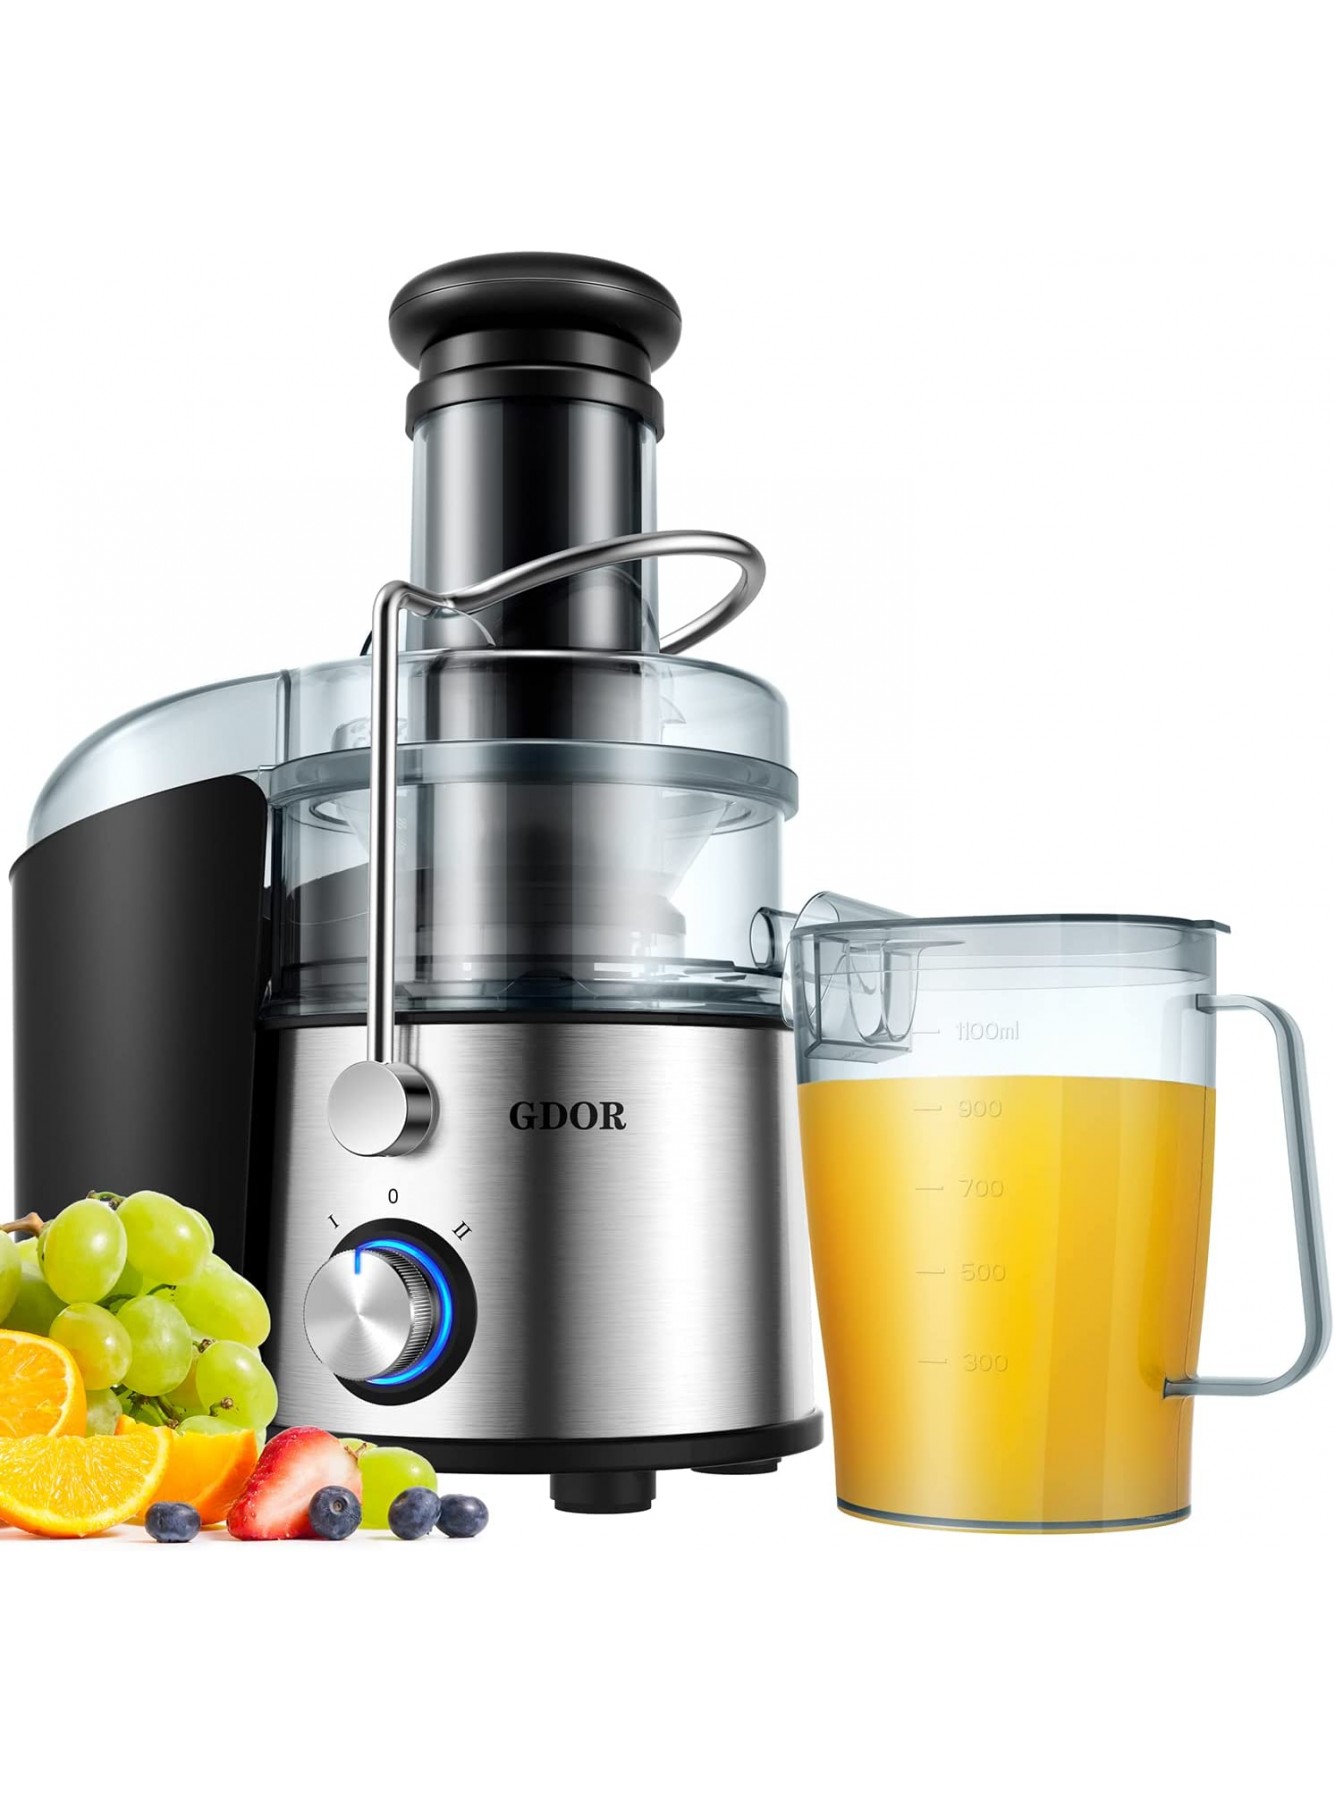 GDOR 1200W Juicer with Titanium Enhanced Cut Disc Larger 3” Feed Chute Juicer Machines for Whole Fruits and Vegetables Centrifugal Juicer with 40 Oz Juice Pitcher BPA-Free Easy to Clean Silver B09VYYCBYW